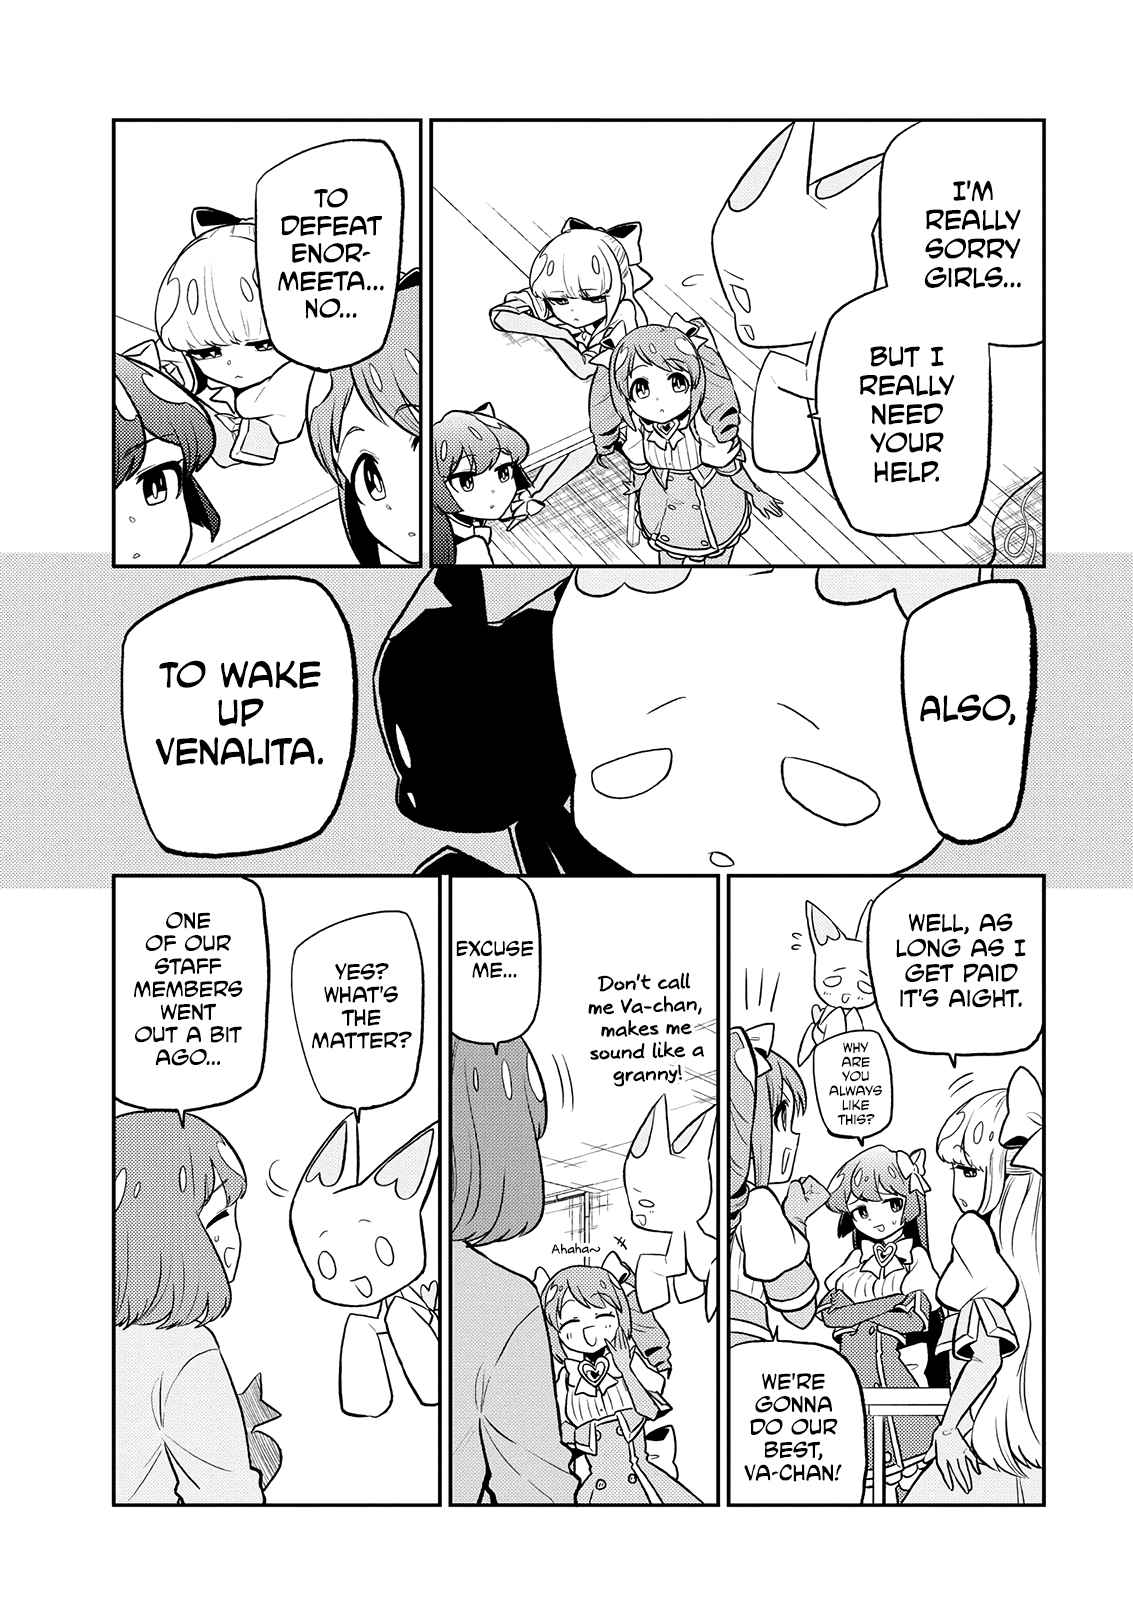 Looking Up To Magical Girls Vol. 2 Ch. 8